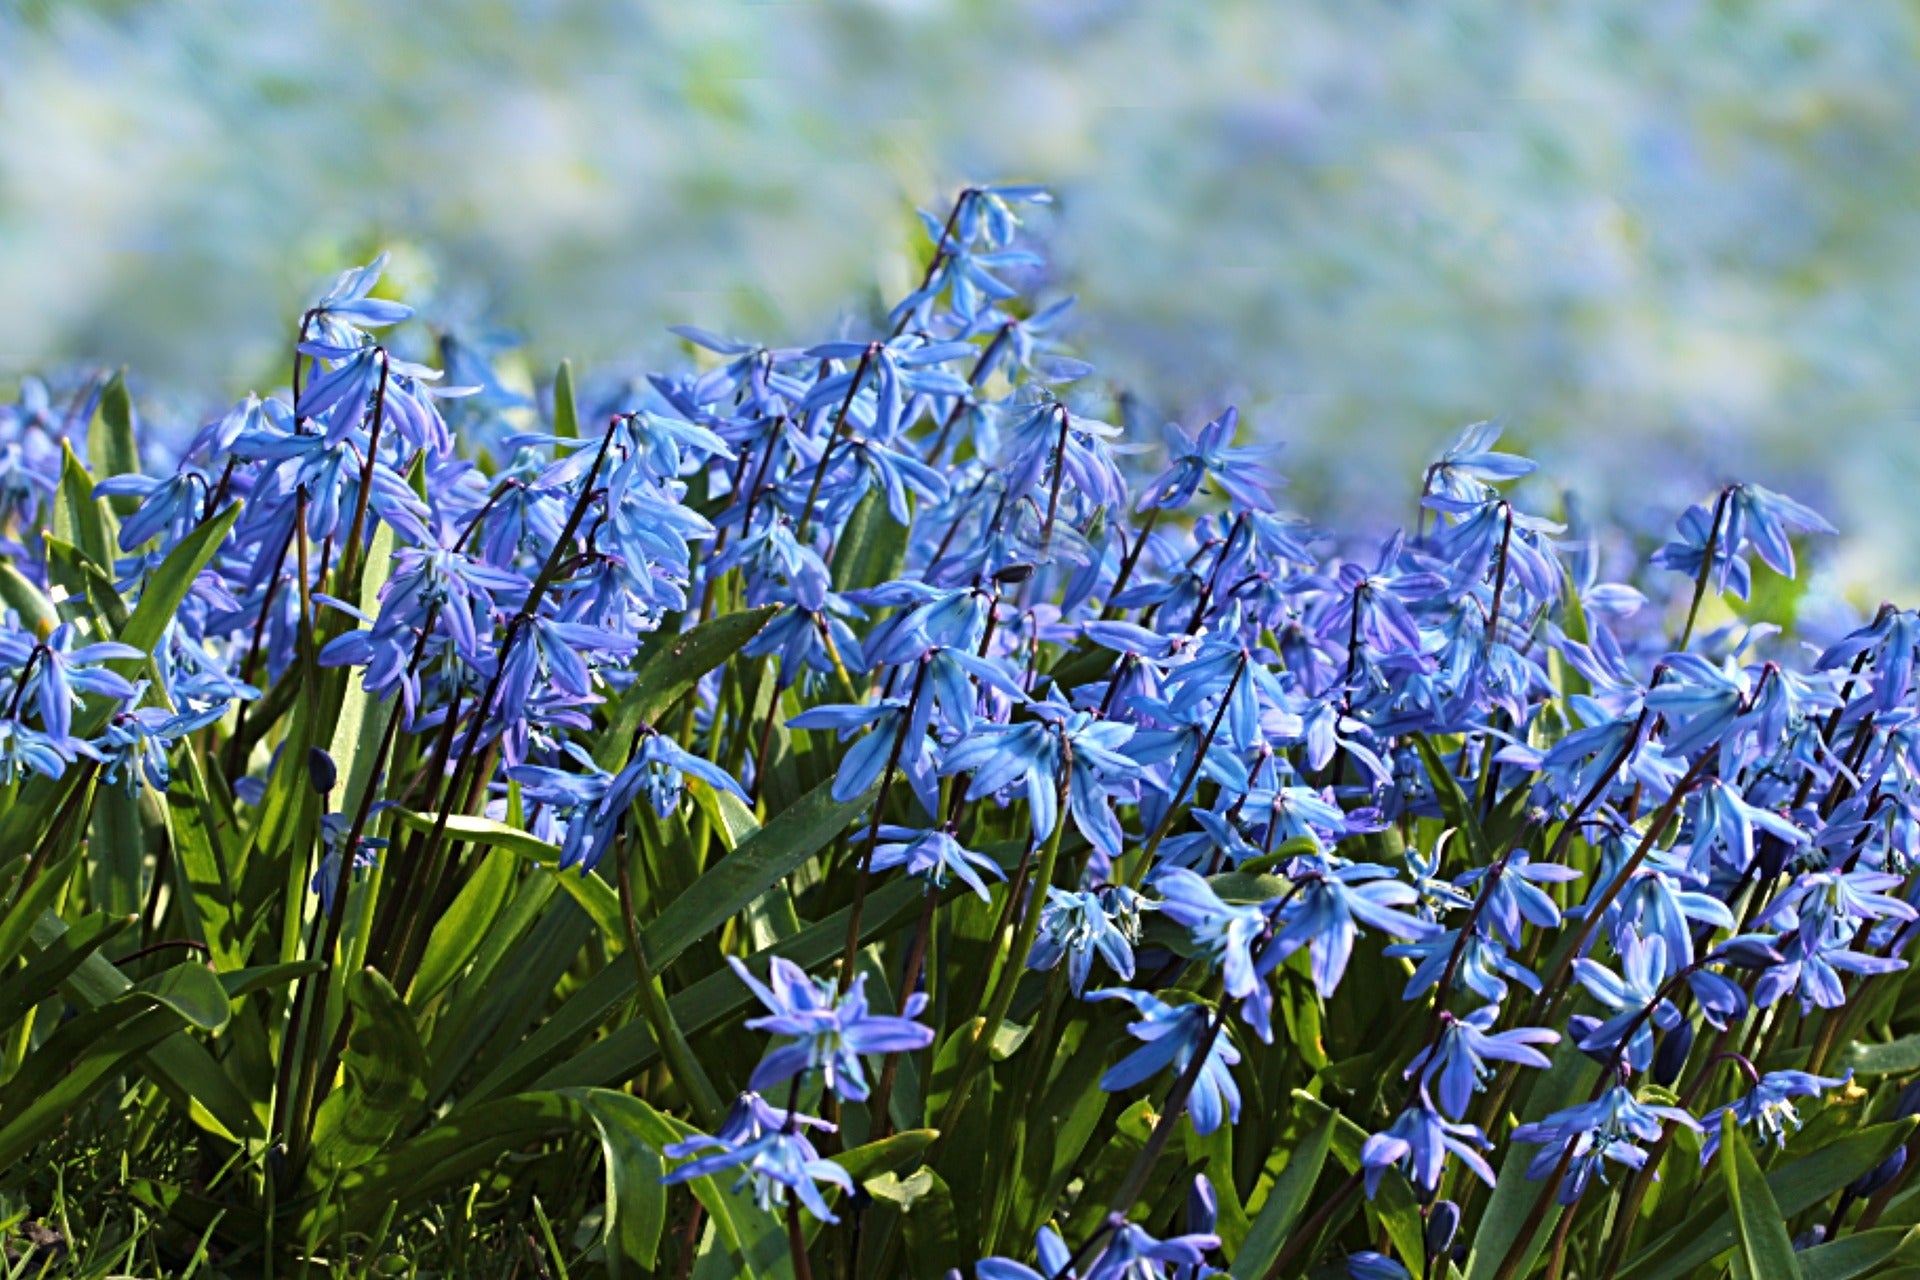 Growing Guides: How to Grow Scilla (Siberian Squill) bulbs